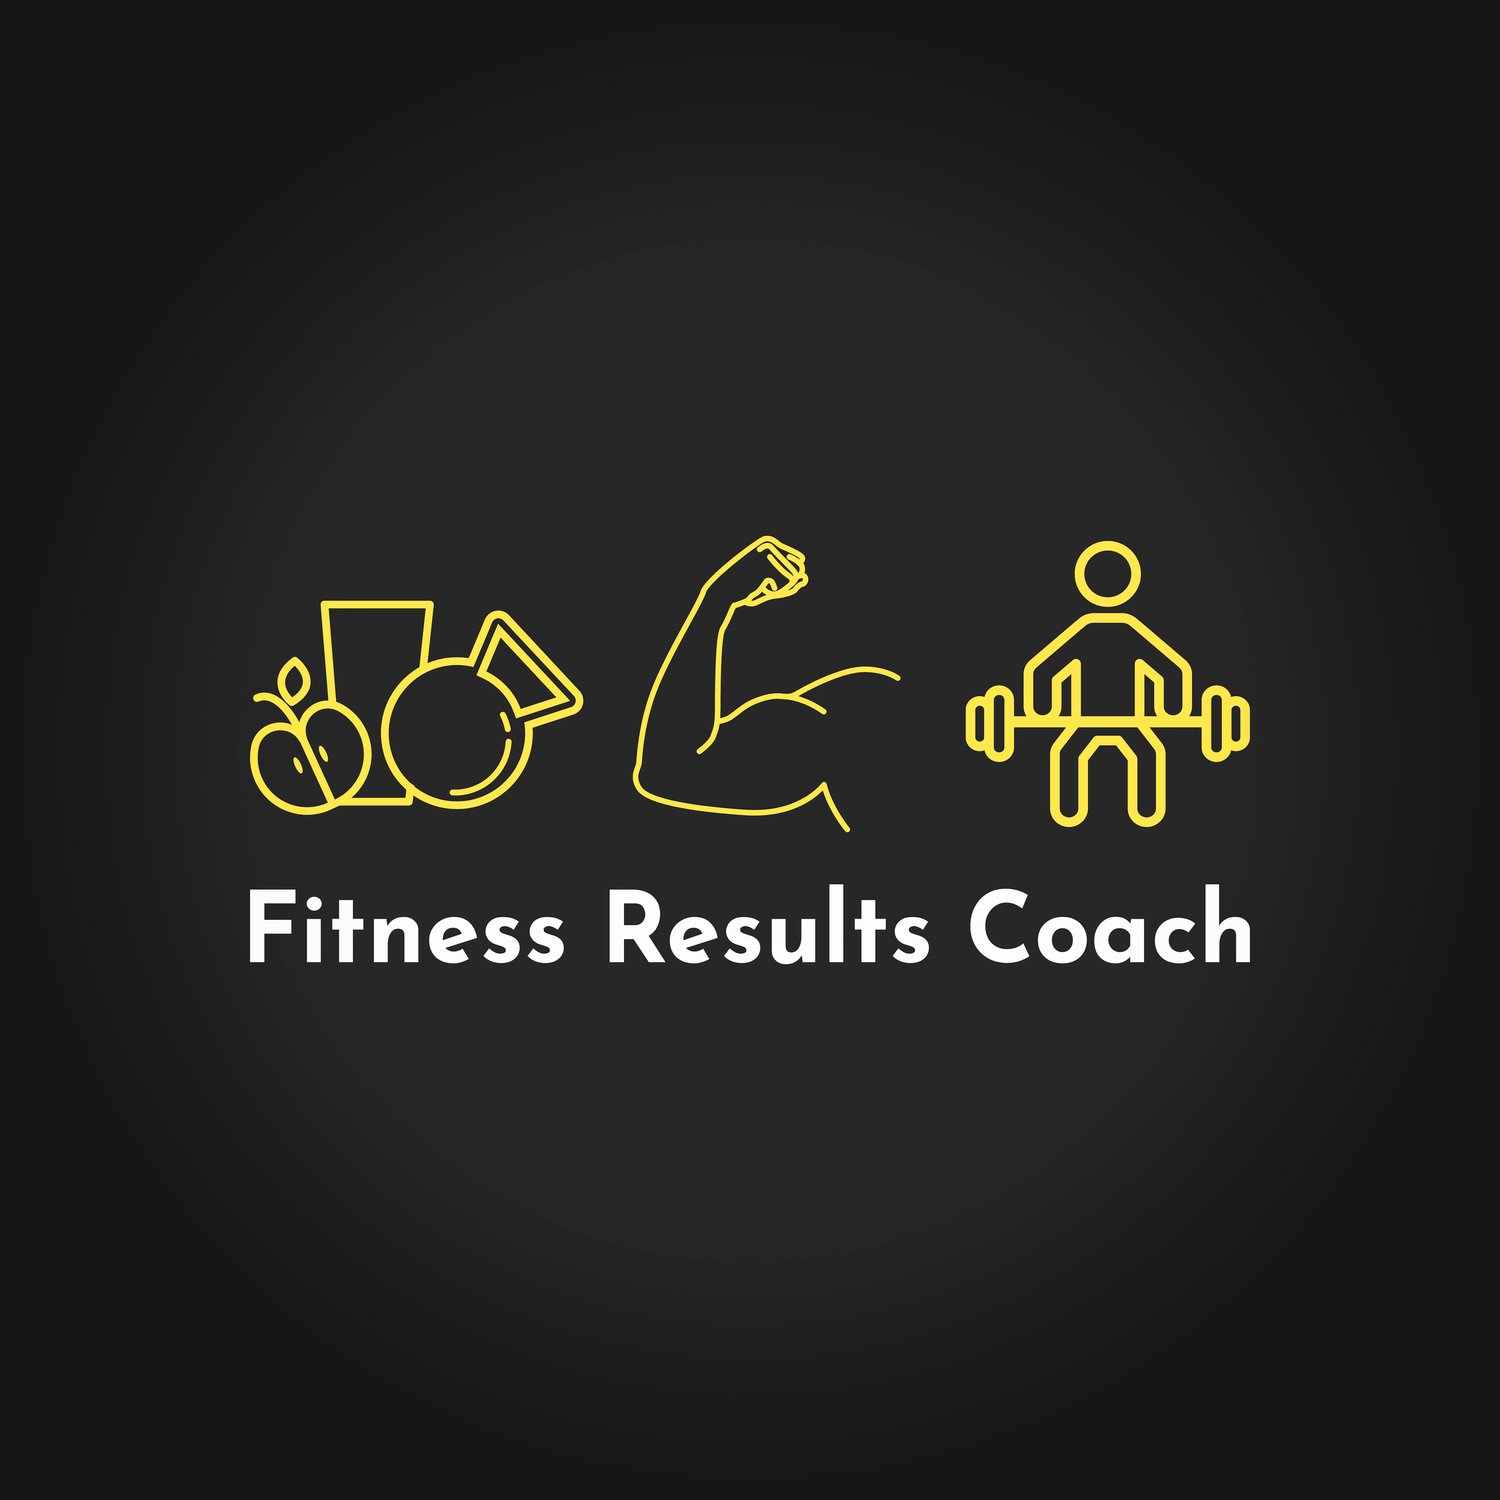 fitnessresultscoach